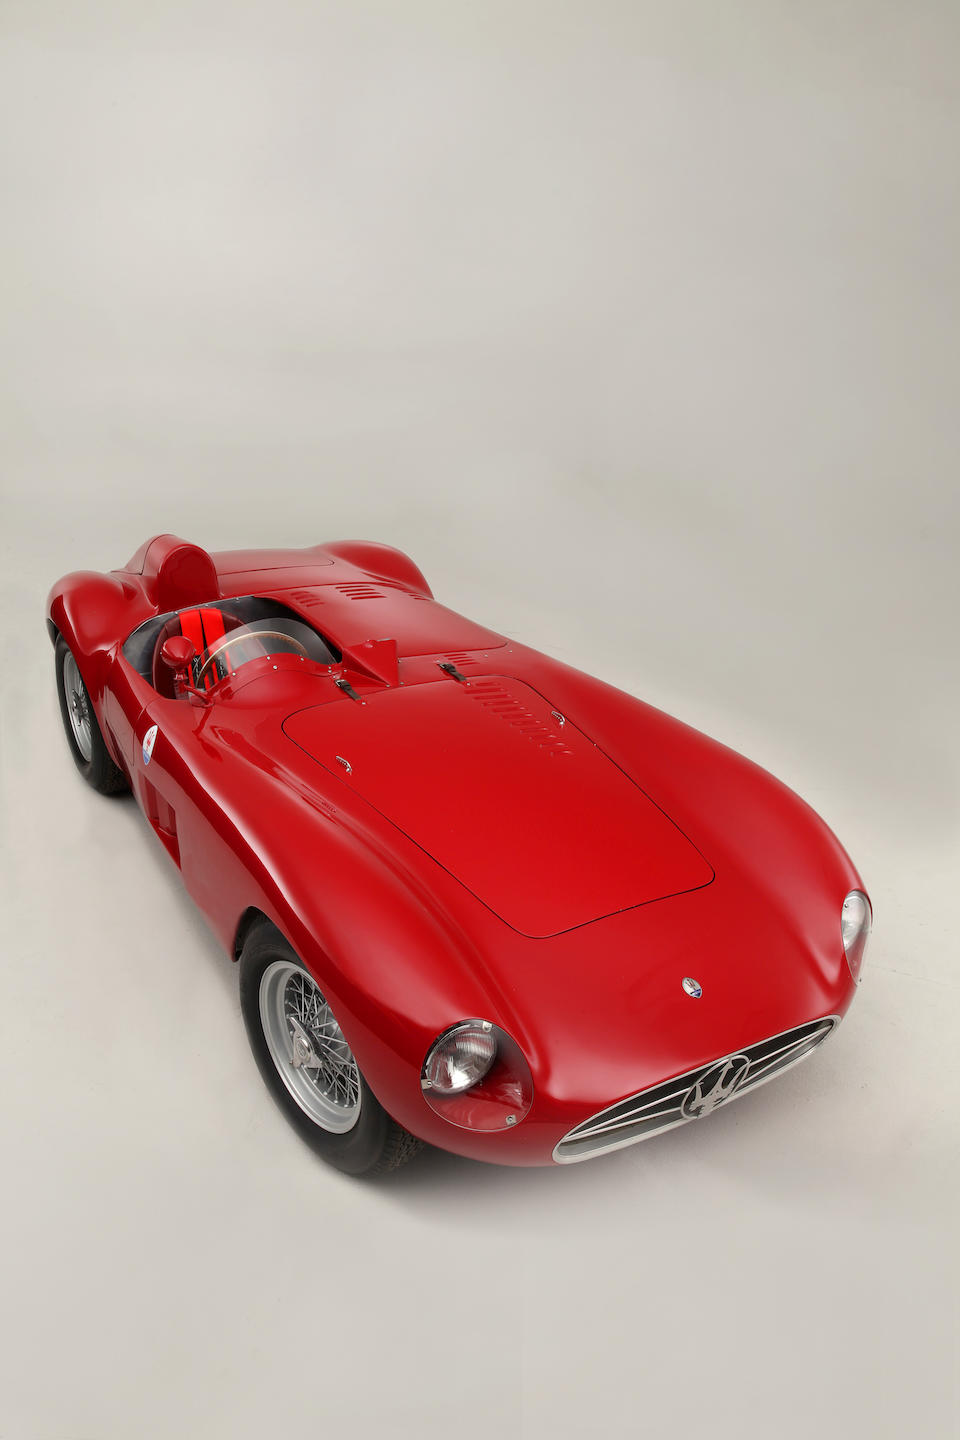 The Ex-Bill Spear/Sherwood Johnston ,1955 Maserati 300S Sports-Racing Spider  Chassis no. 3053 Engine no. 3053 (see text)